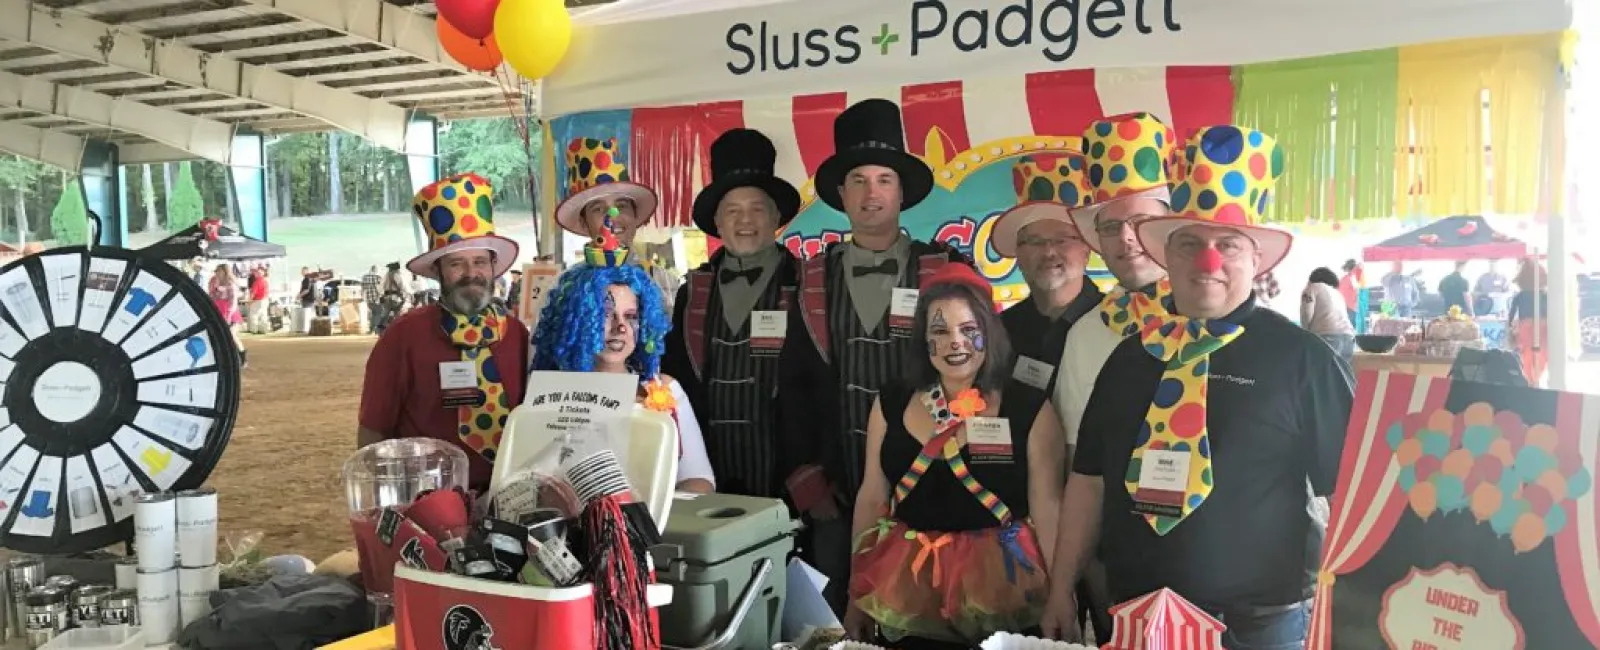 Clowning Around at the ABC Chili Cook-off